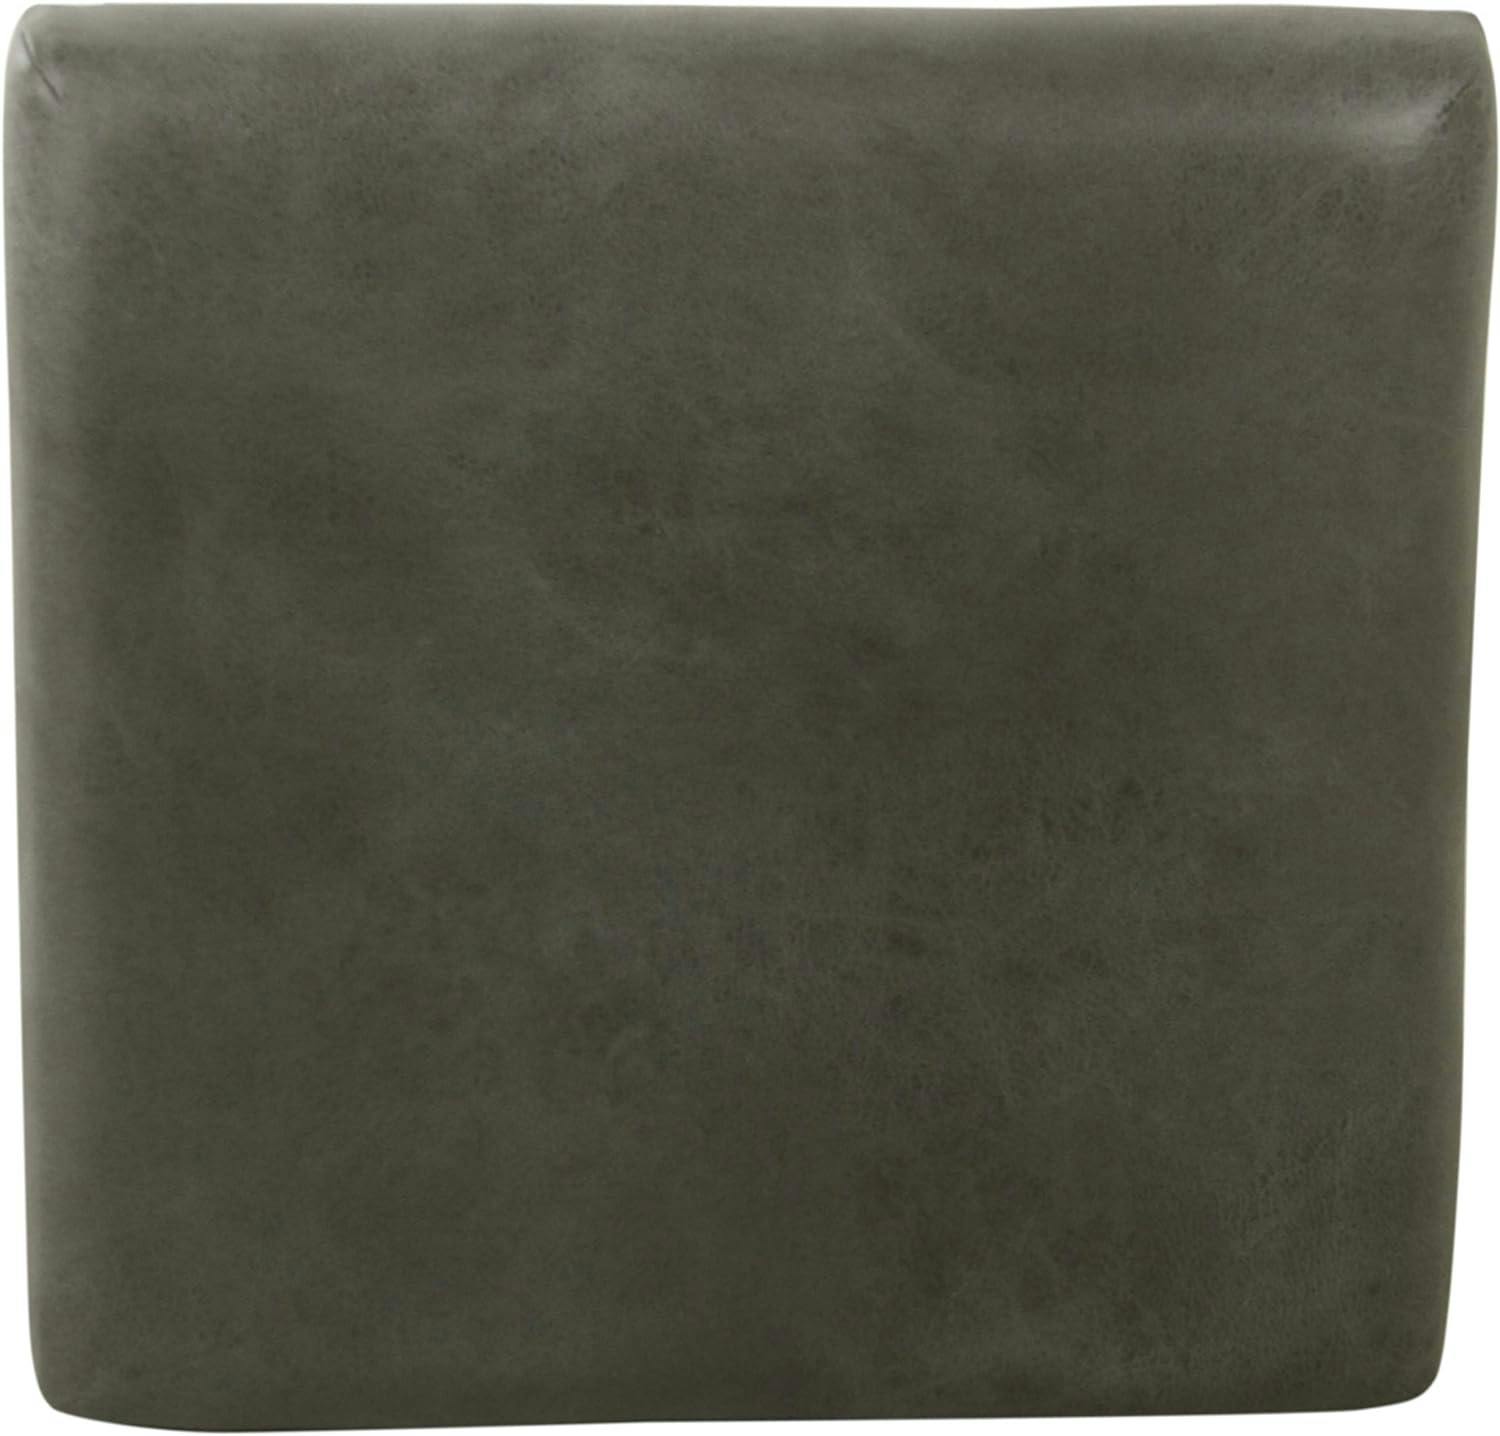 Modern Industrial Gray Faux Leather Ottoman with Sleek Metal Base